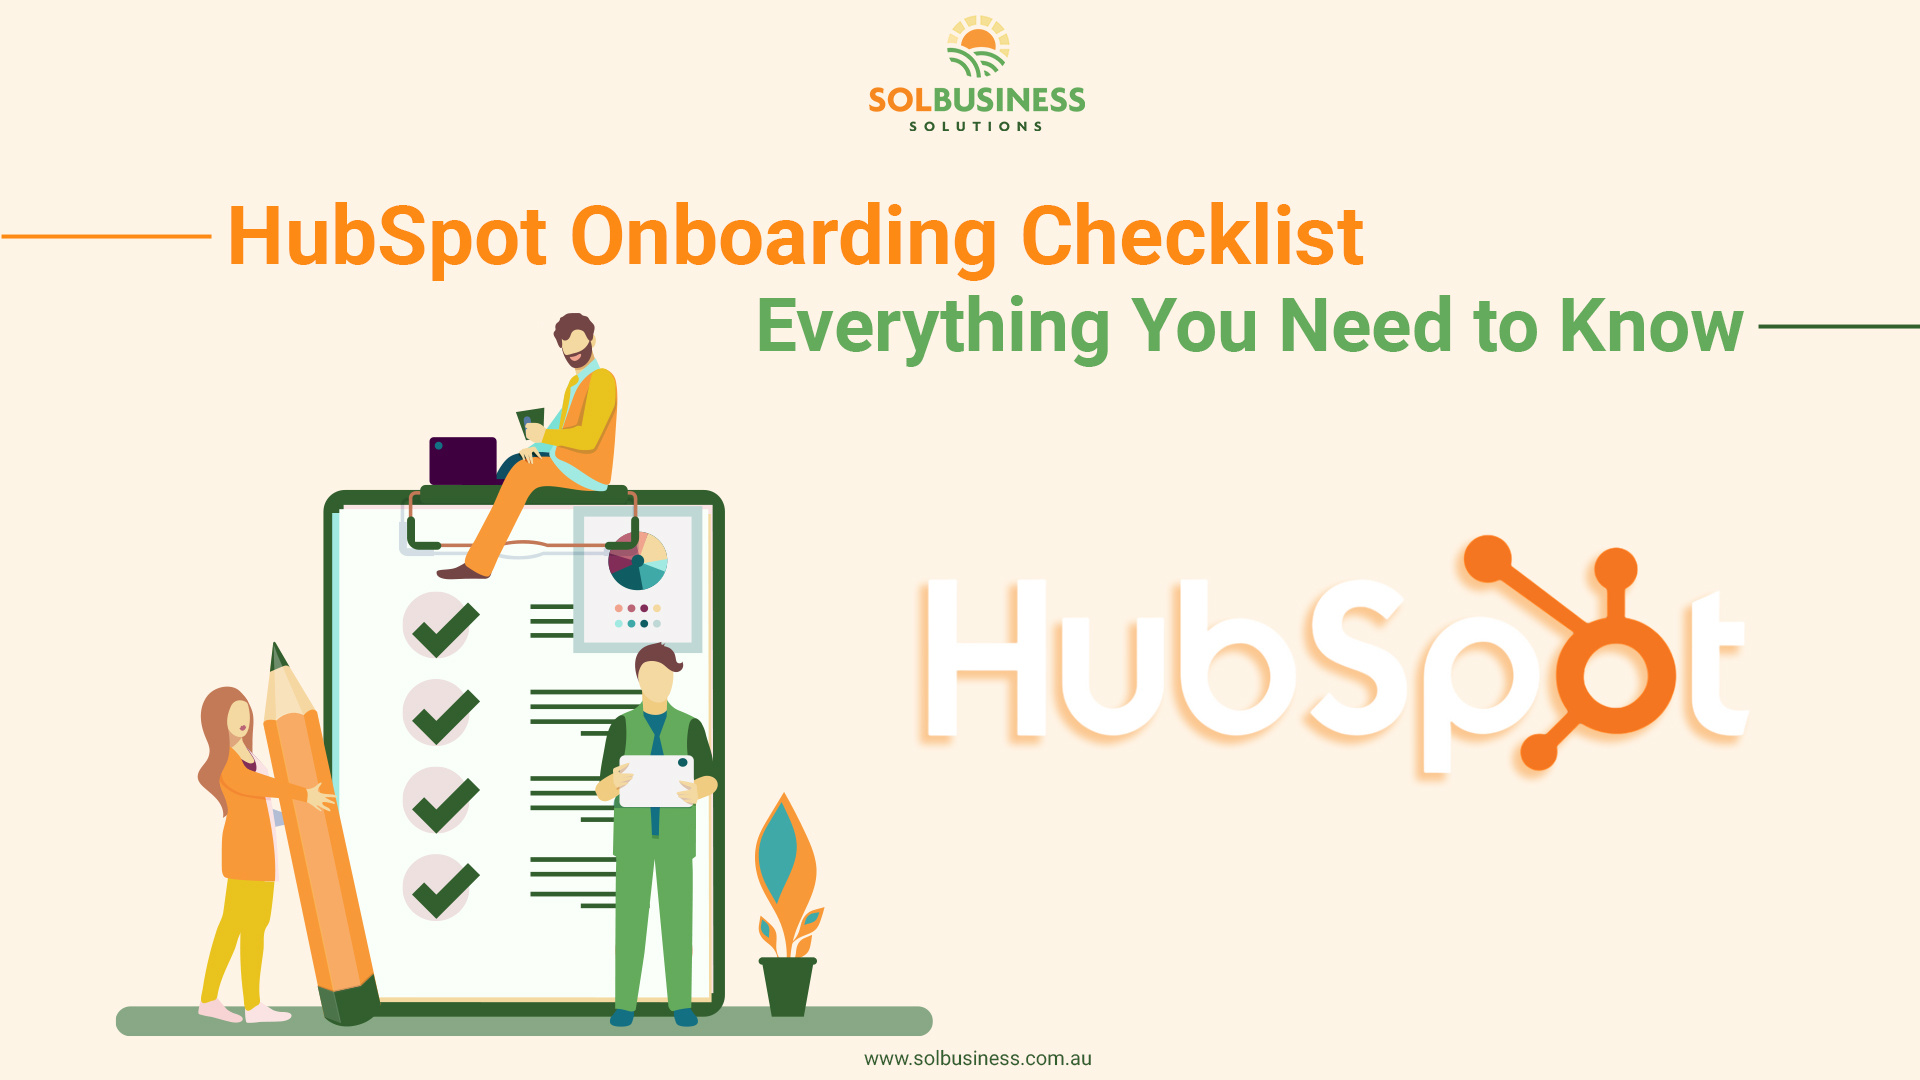 HubSpot Onboarding Checklist: Everything You Need to Know